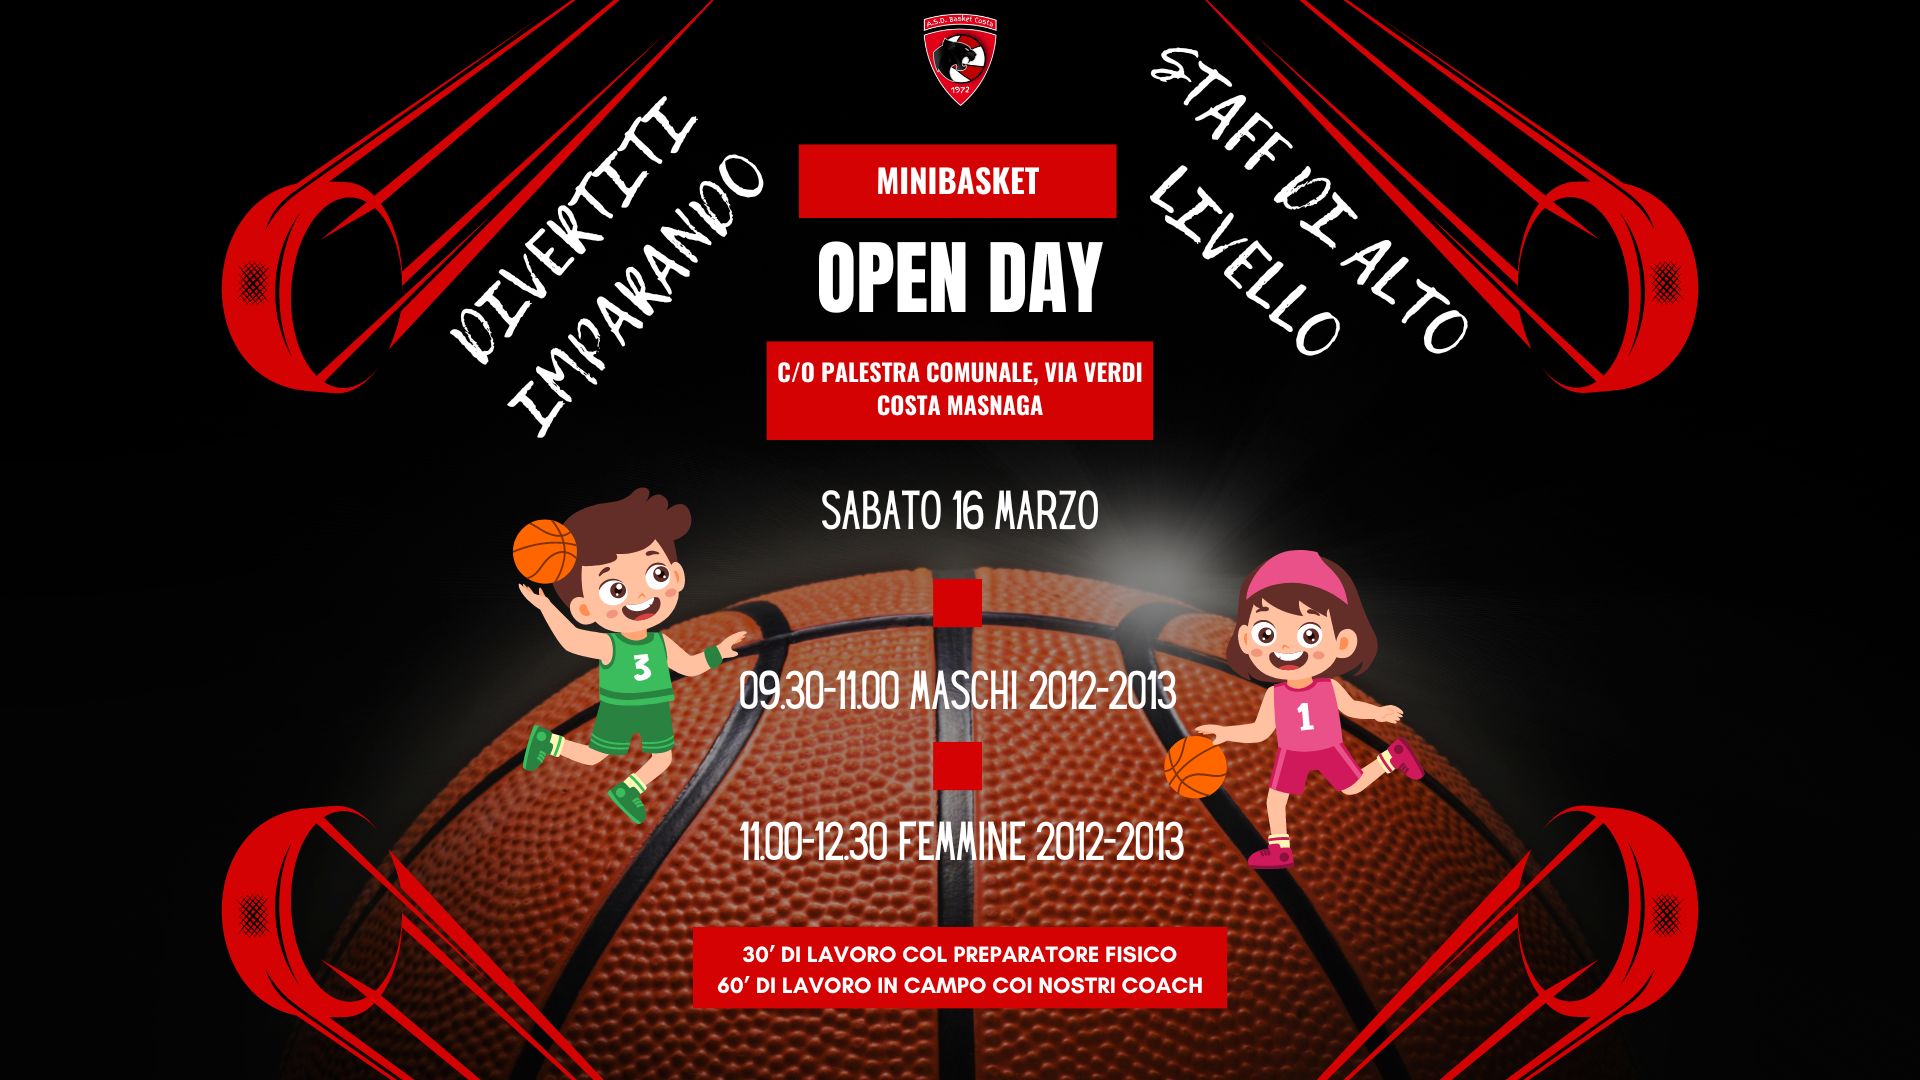 16 MARZO: OPEN DAY MB!